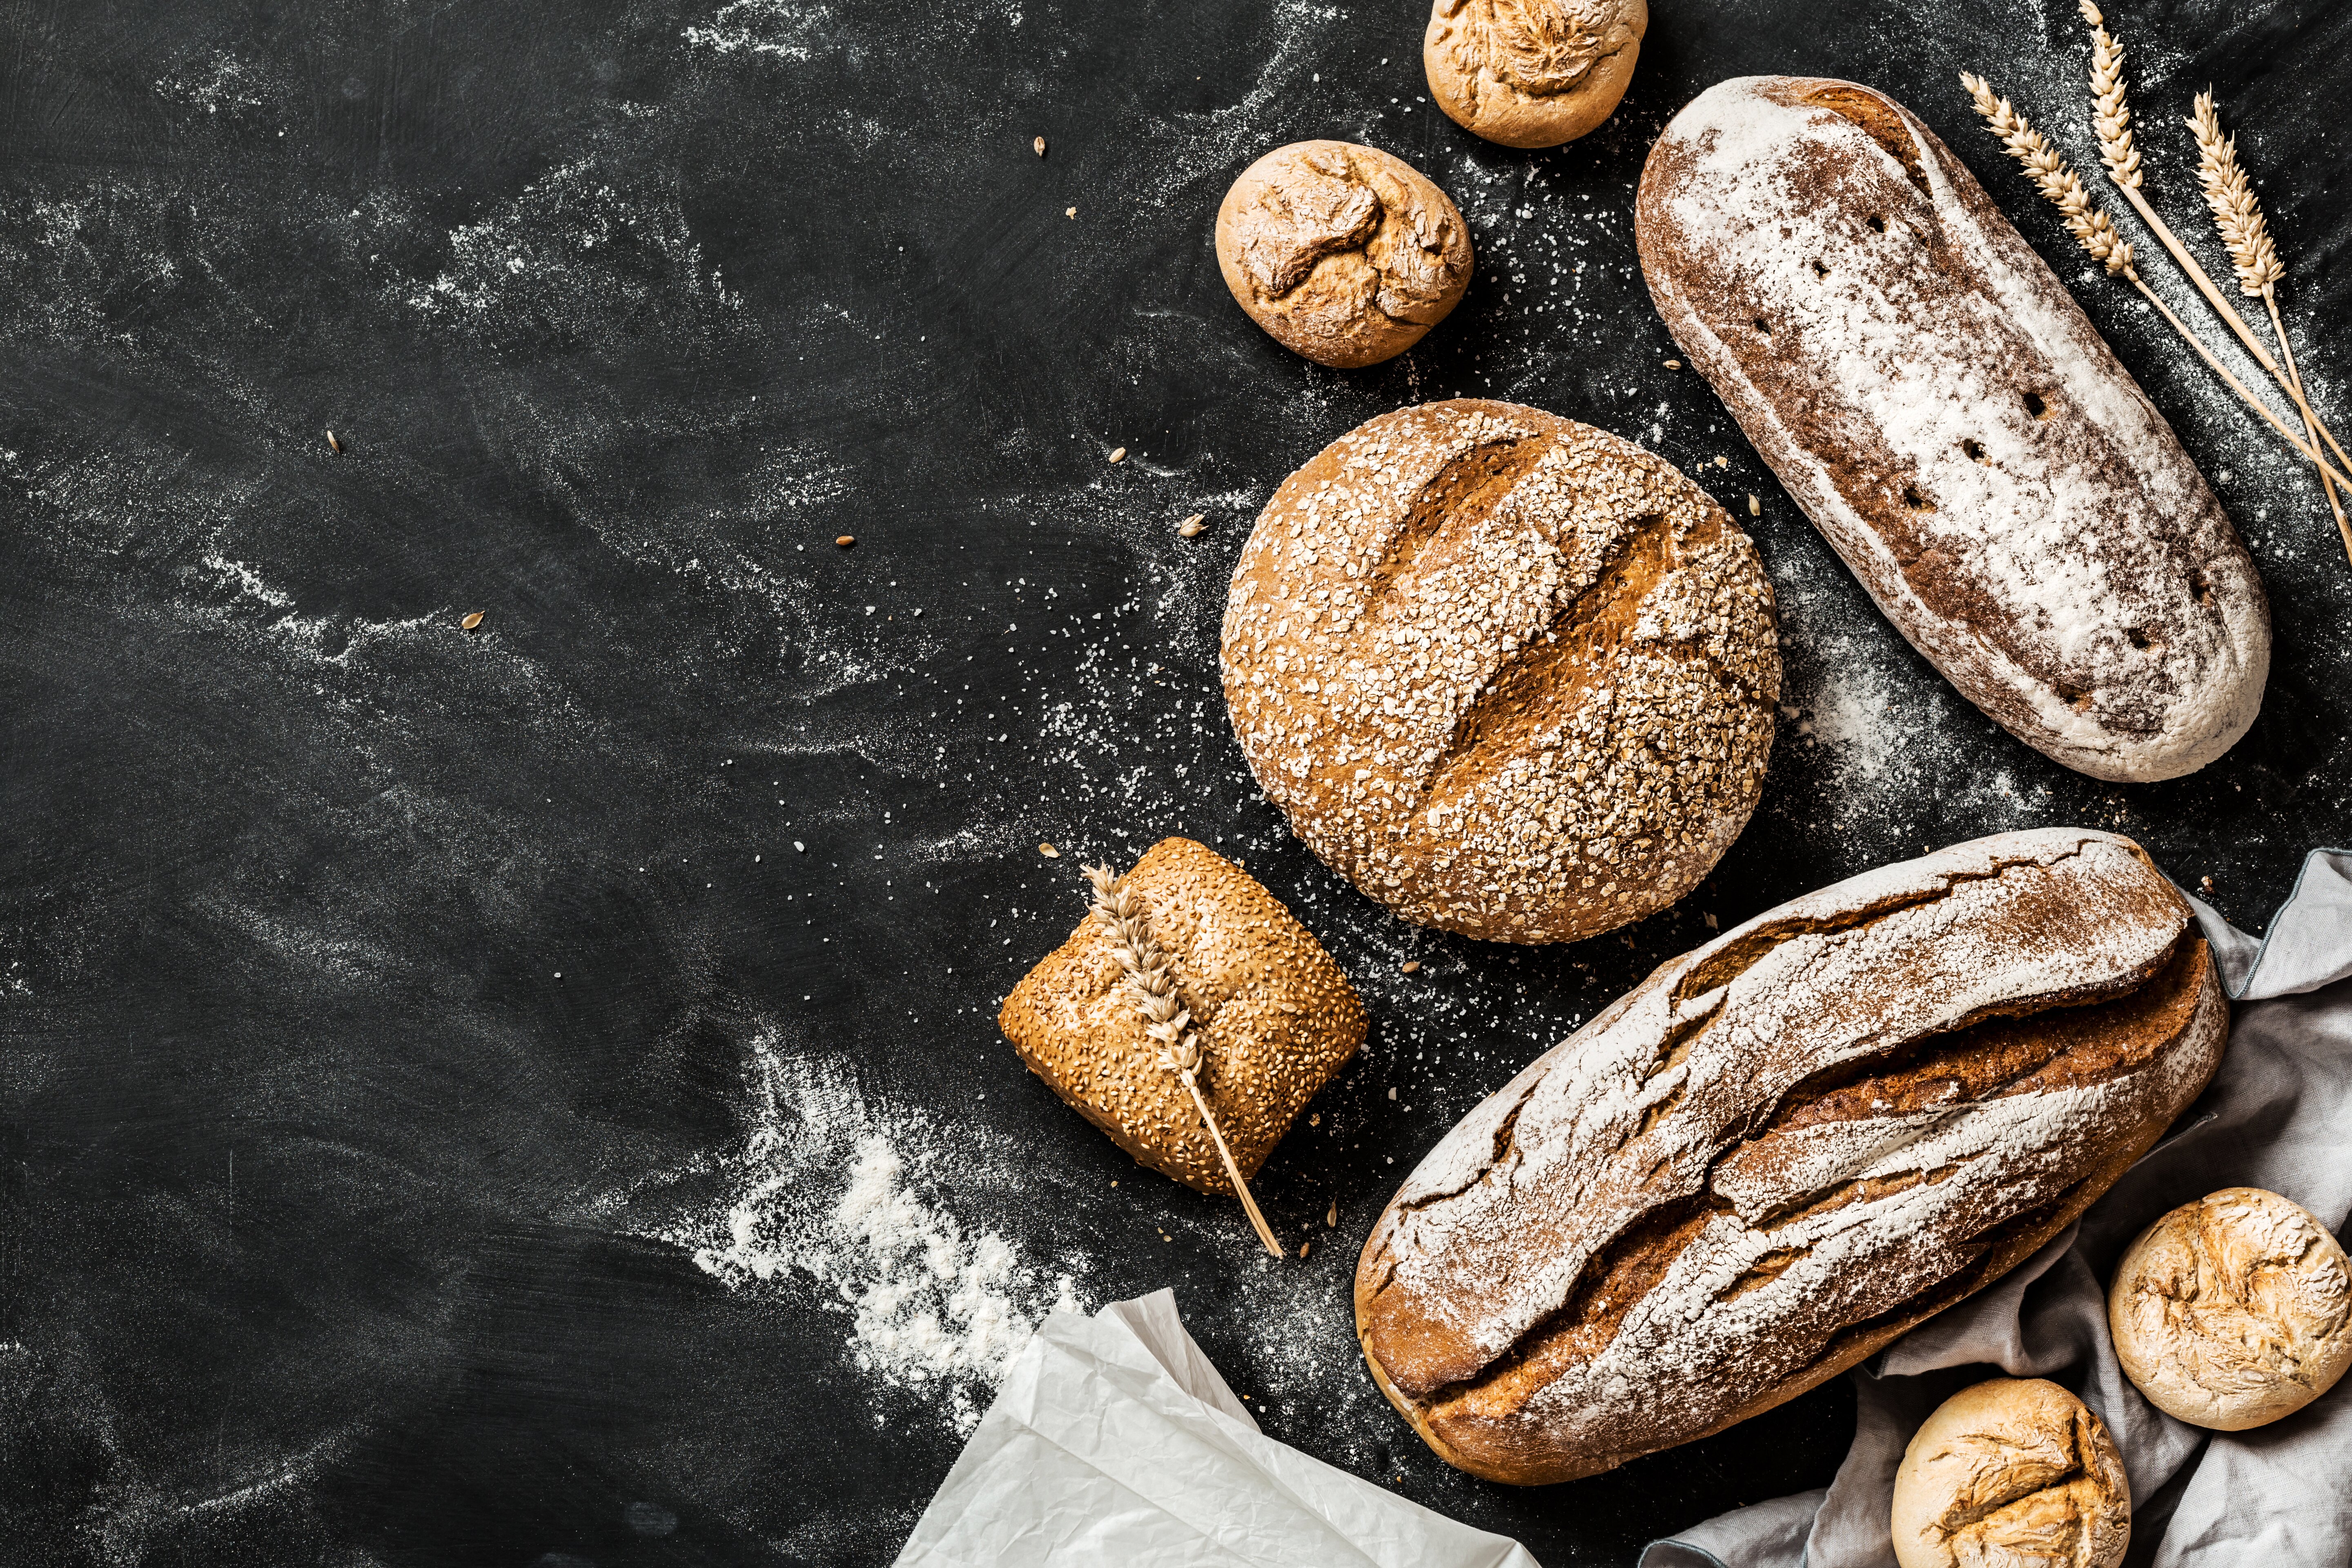 How to harness recent enthusiasm for sourdough into bread and pâtisserie fit for your discerning customers